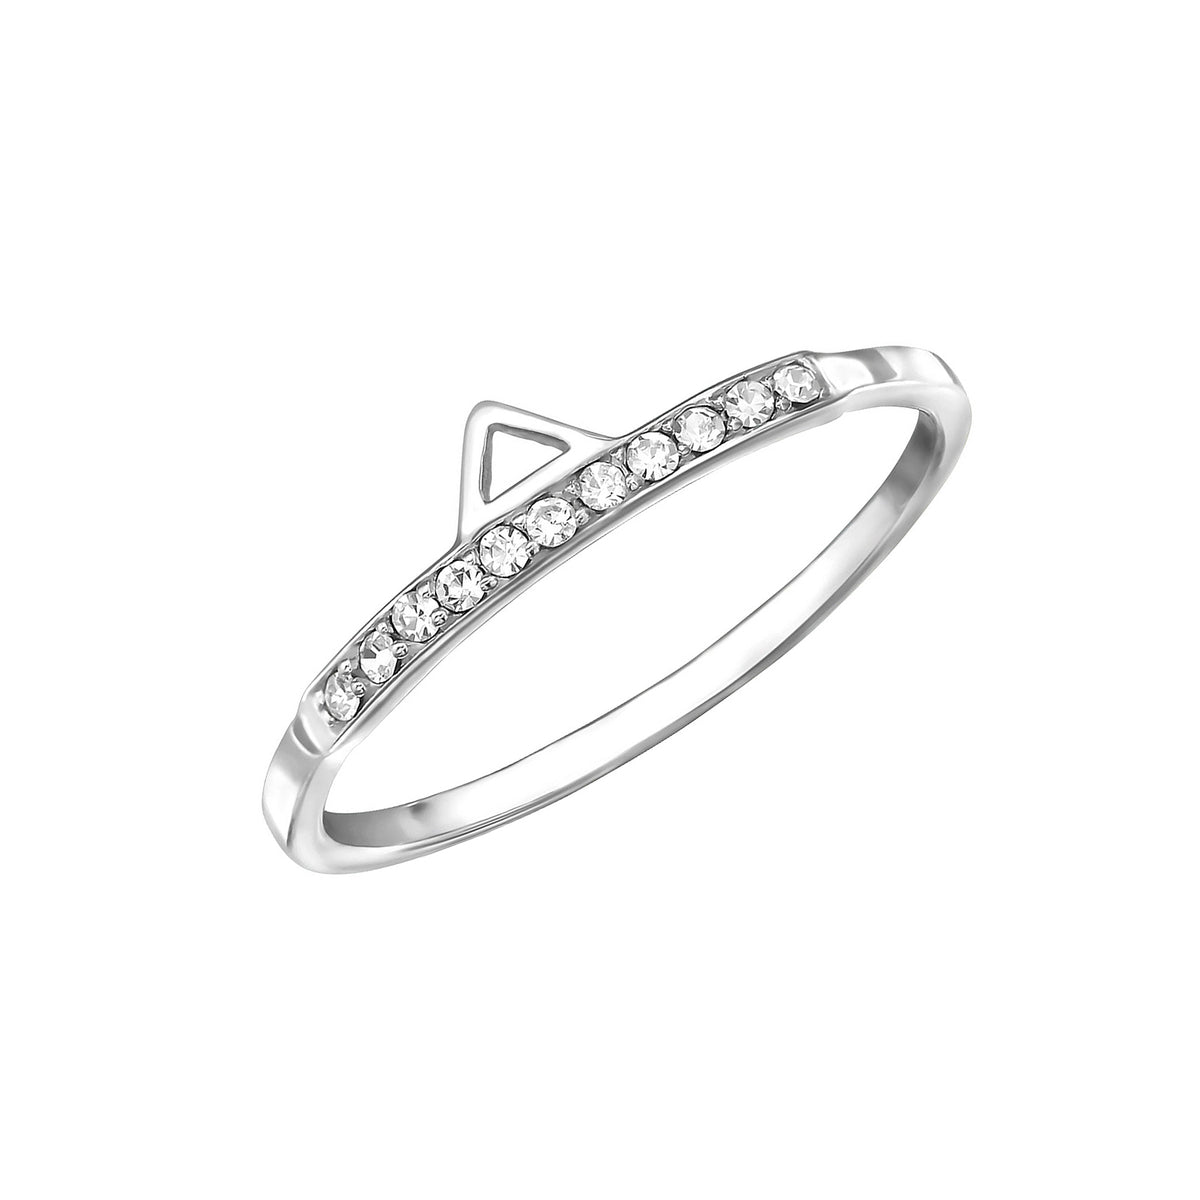 INEL ARGINT 925 ZIRCONIA TIARA rings > silver ring > zirconia ring > gifts for her > gifts for girls > gifts for moms > gifts for best friend > birthday gift Maison la Stephanie   